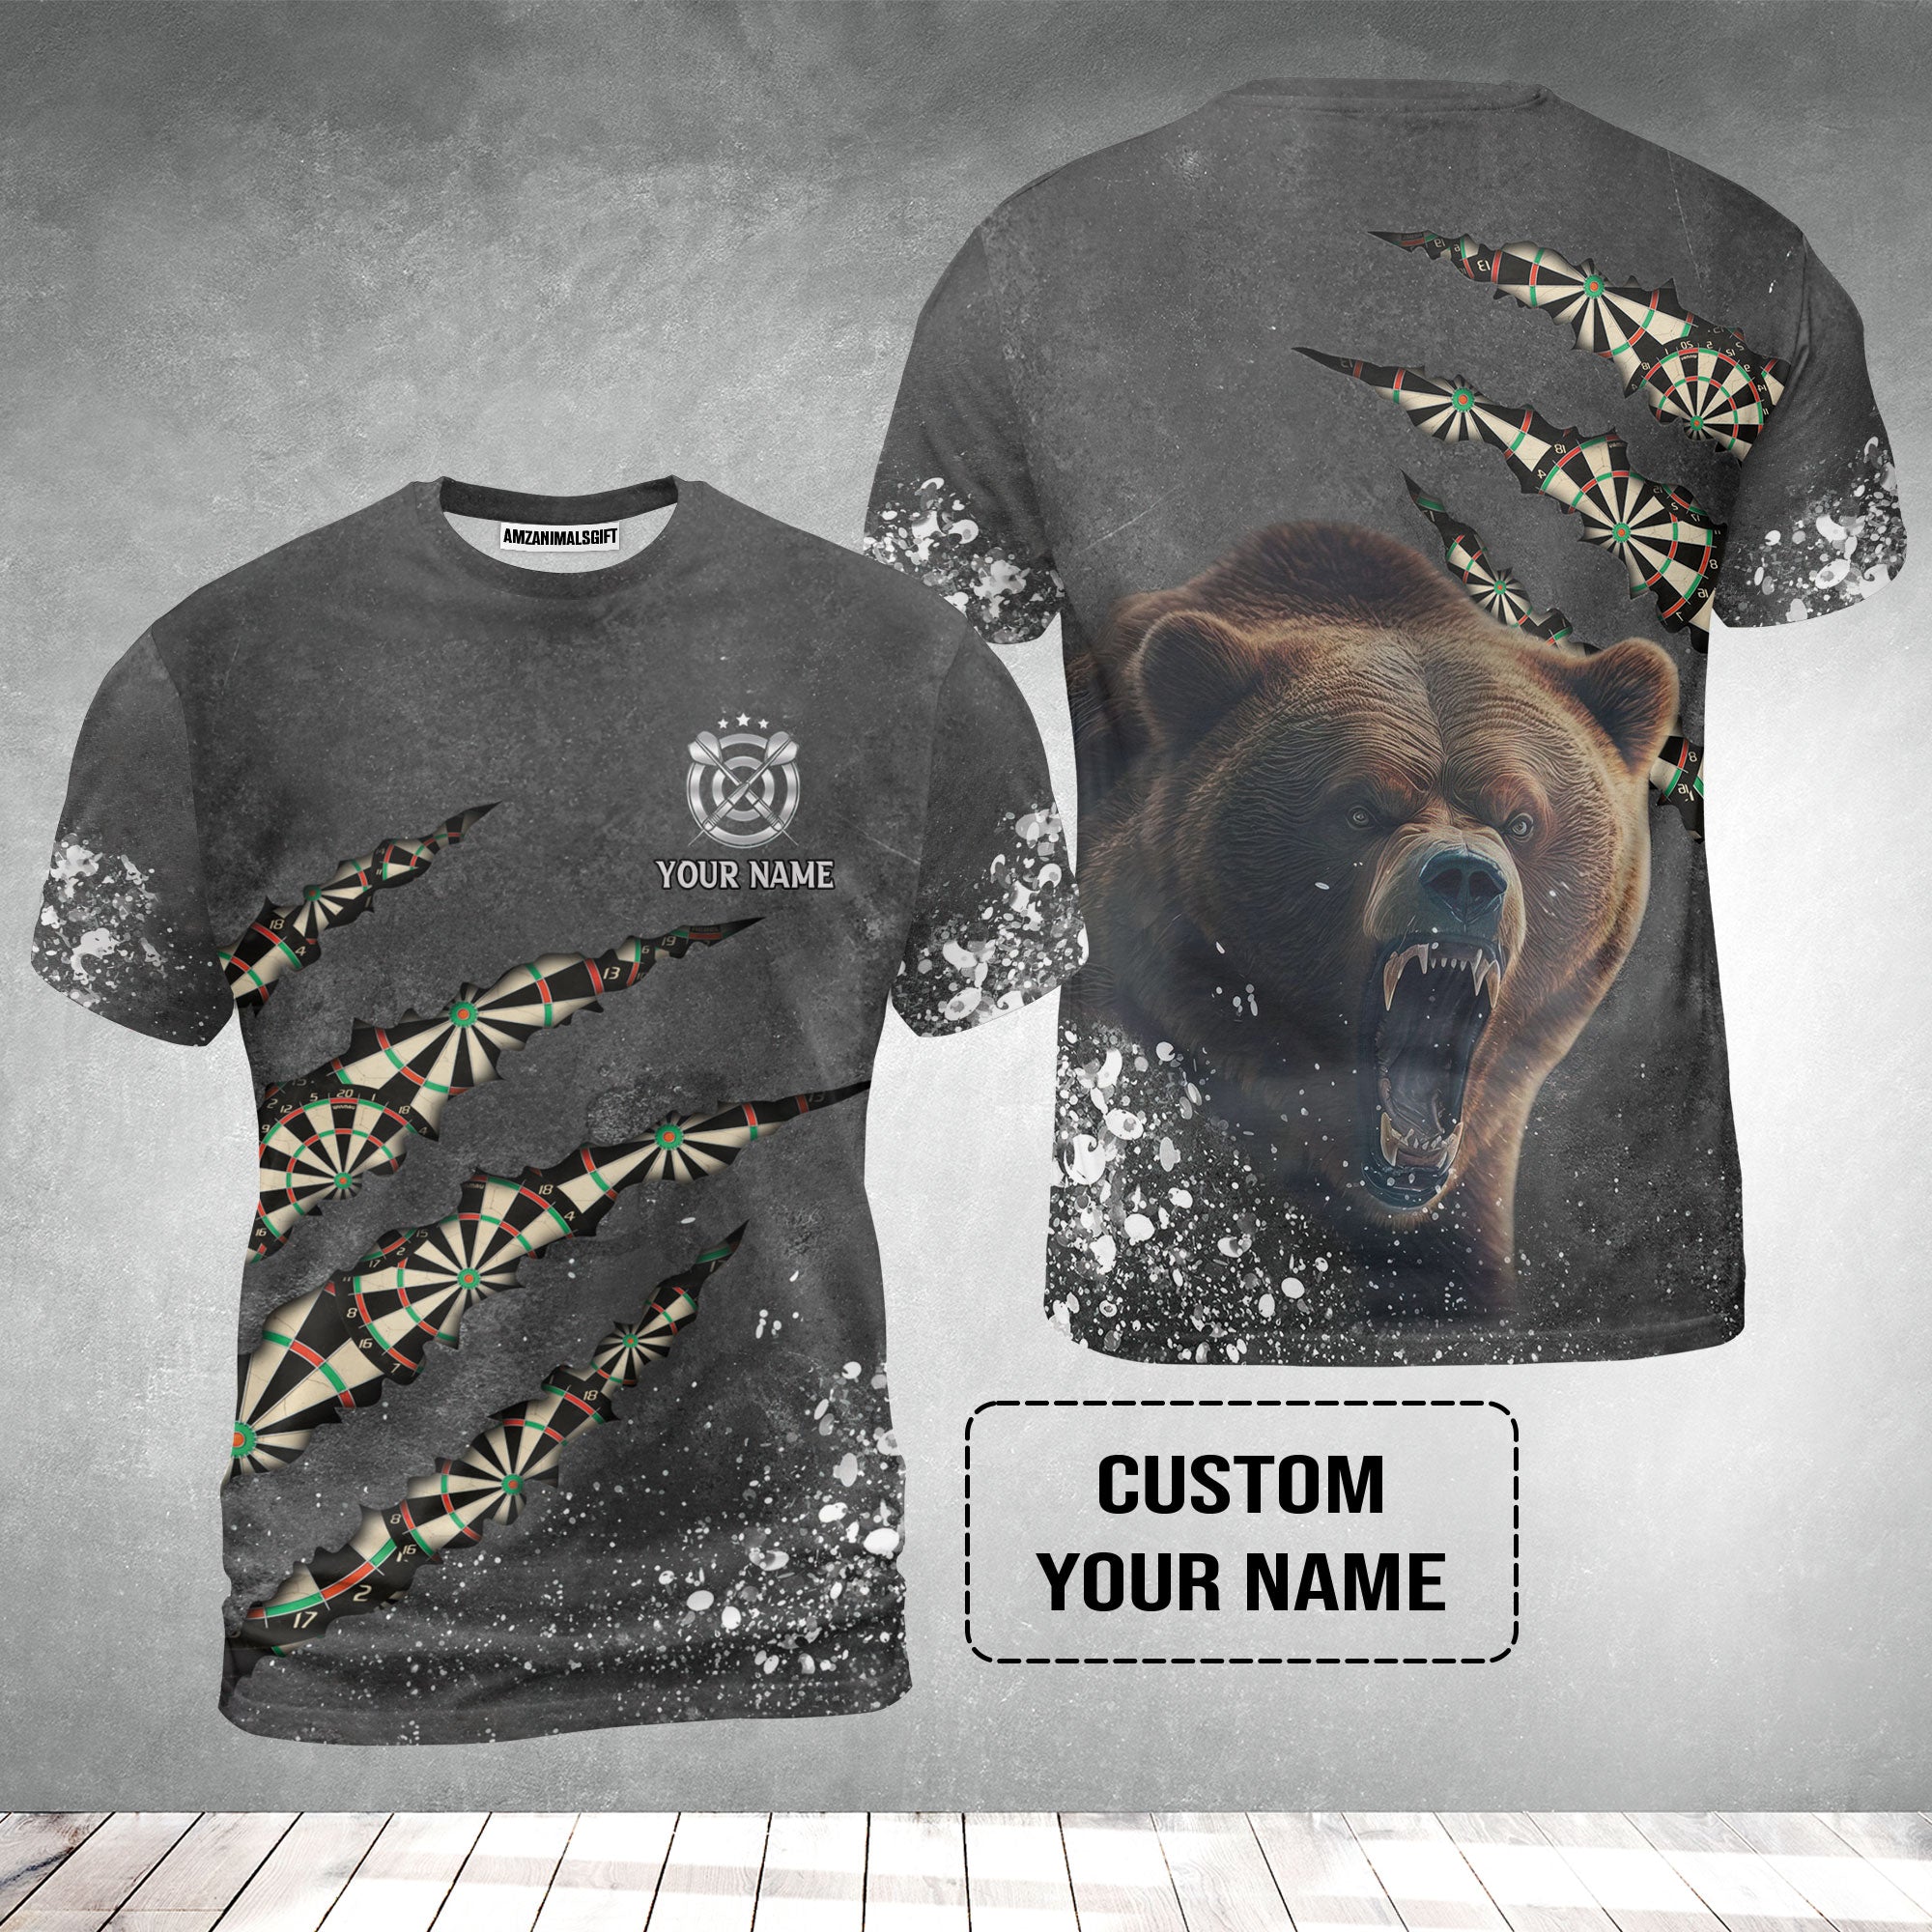 Darts Customized Name T-Shirt, Darts Paints Splash, Personalized Name Bear T-Shirt - Perfect Gift For Darts Lovers, Darts Players